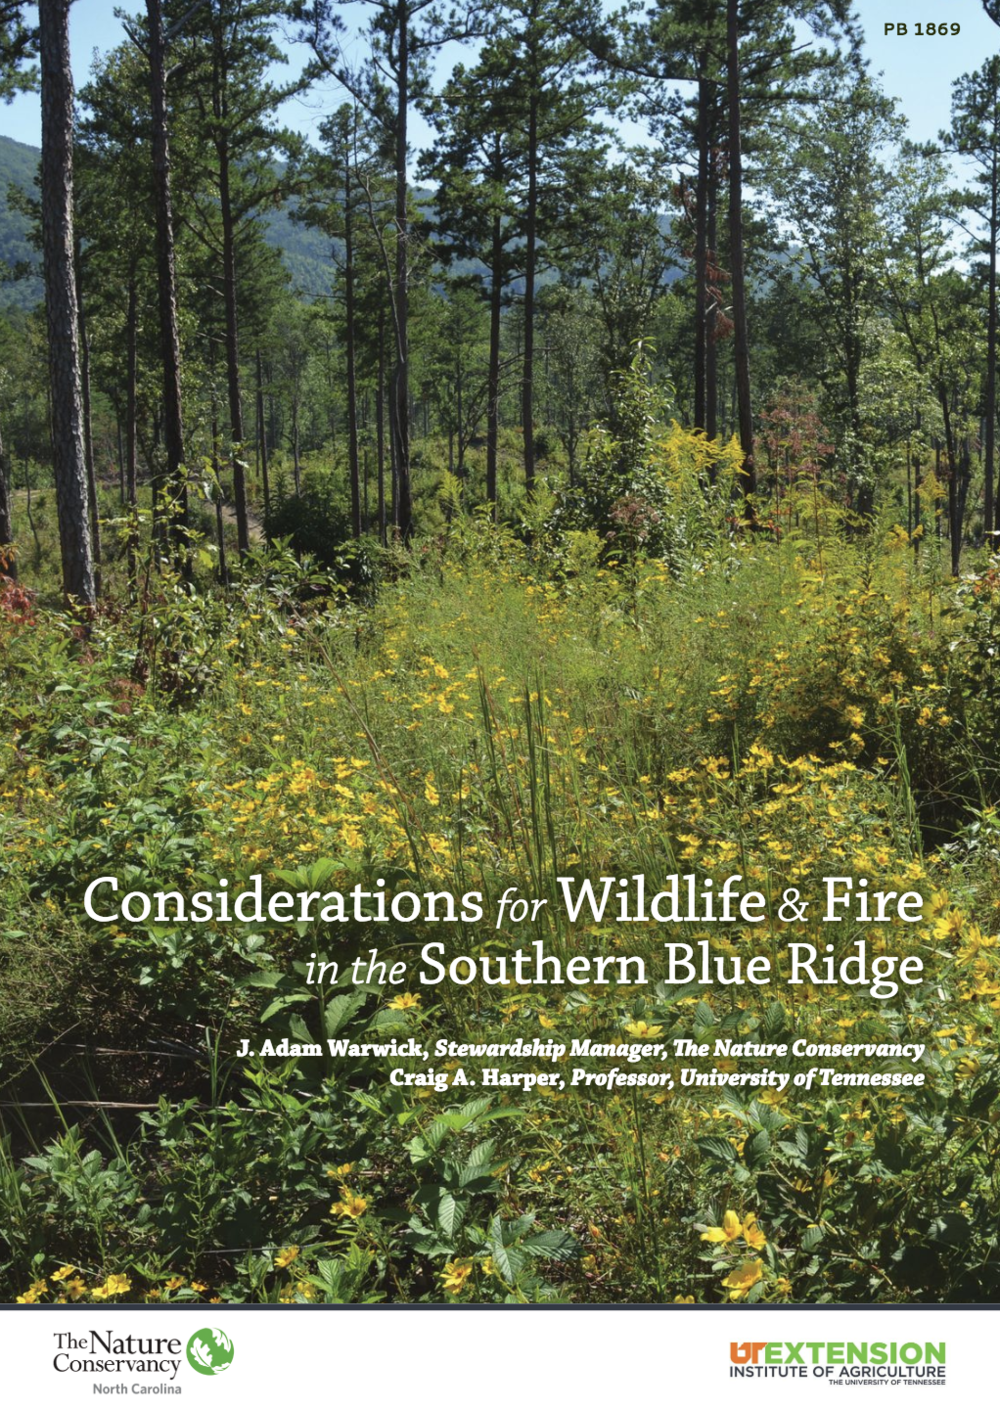 Considerations for Wildlife & Fire in the Southern Blue Ridge